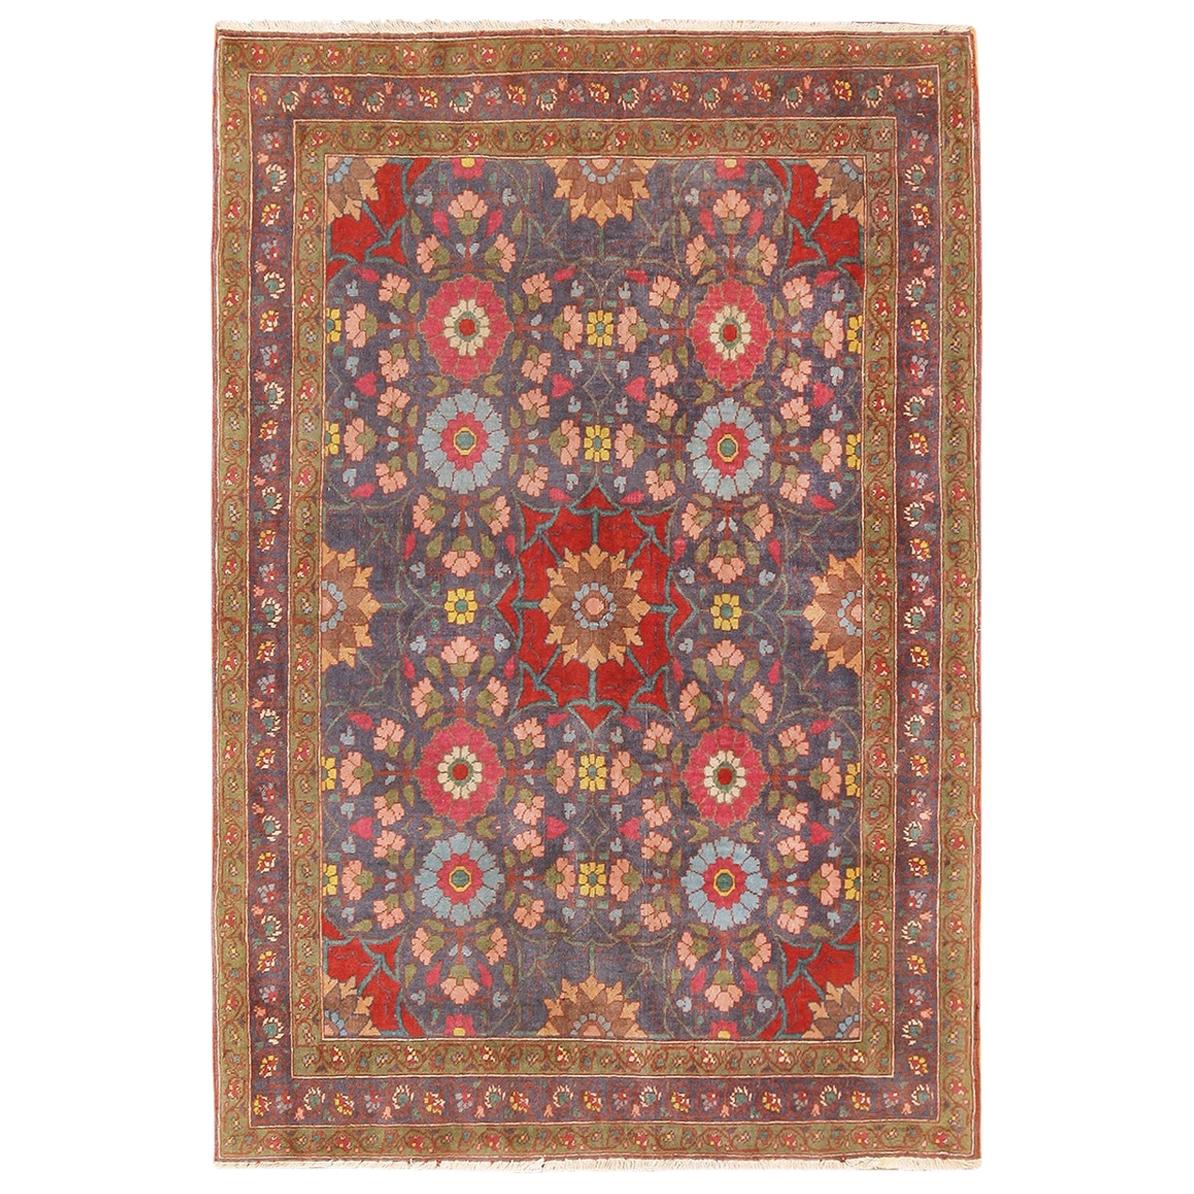 Fine Antique Persian Tabriz Rug. Size: 2 ft 10 in x 4 ft 2 in (0.86 m x 1.27 m)